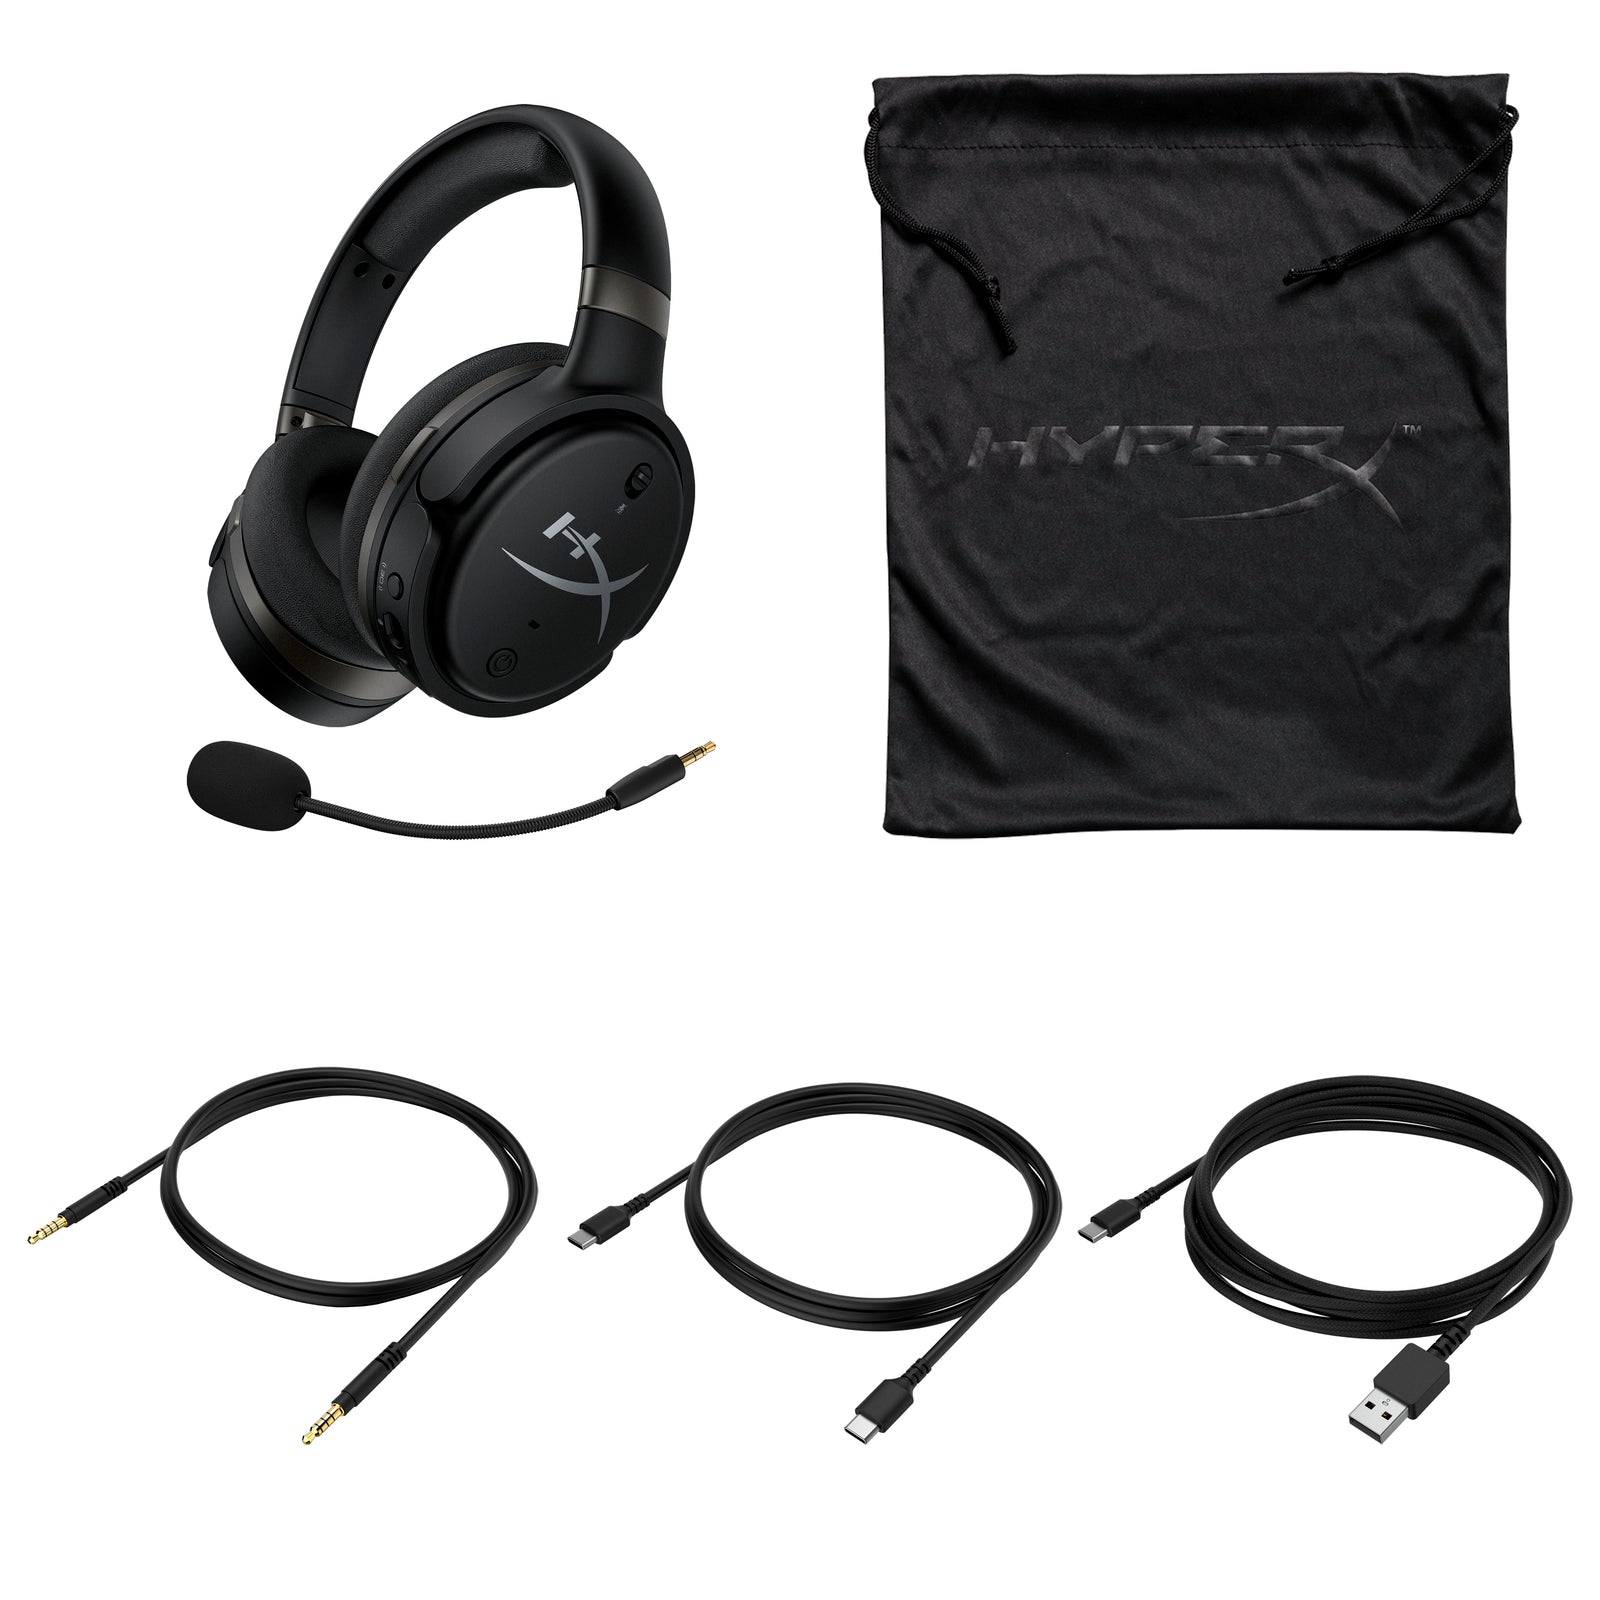 Cloud Orbit S Gaming Headset with 3D Audio & Head Tracking| HyperX 